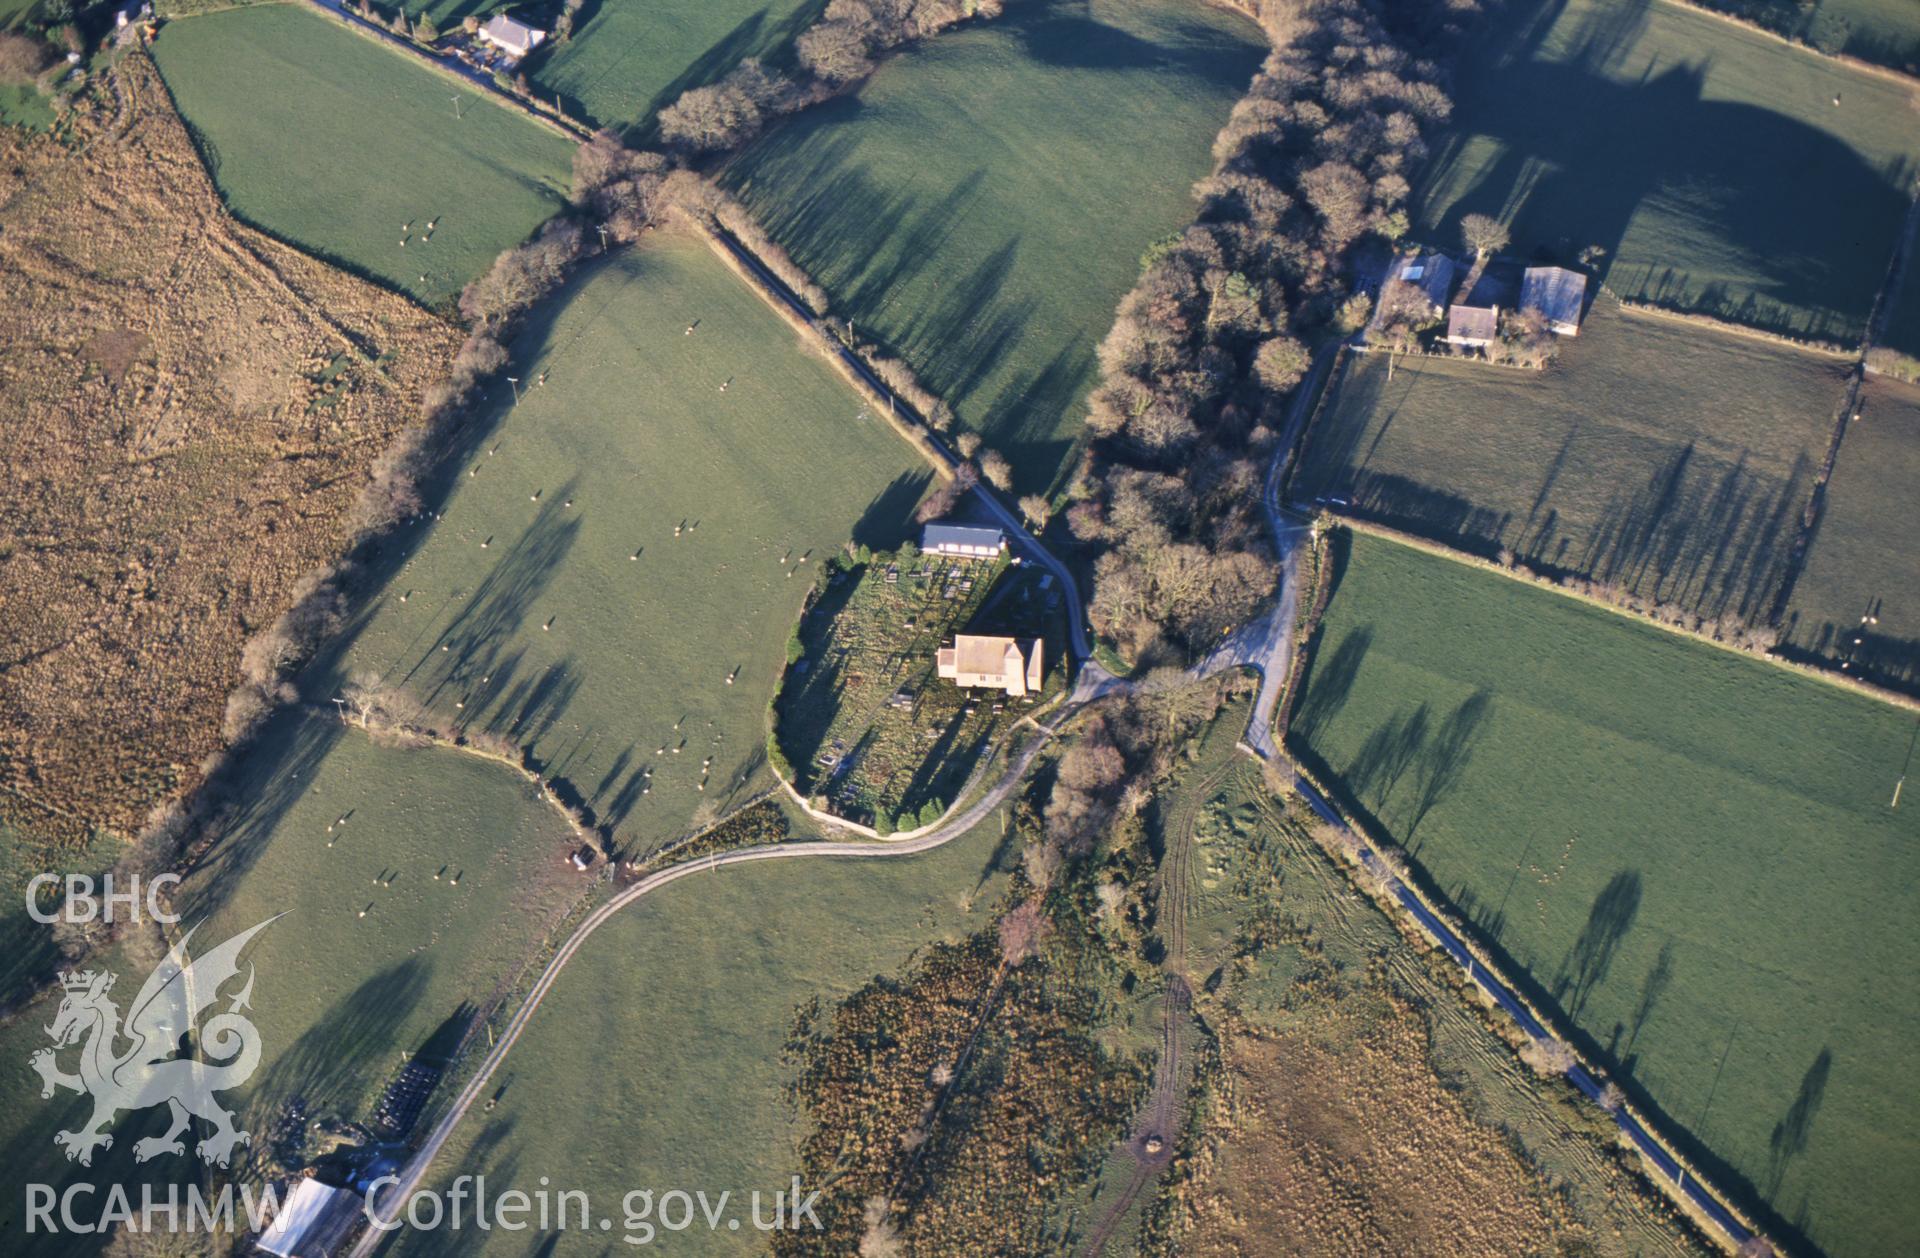 Slide of RCAHMW colour oblique aerial photograph showing the church at Tyn y Graig, taken by T.G. Driver, 2001.